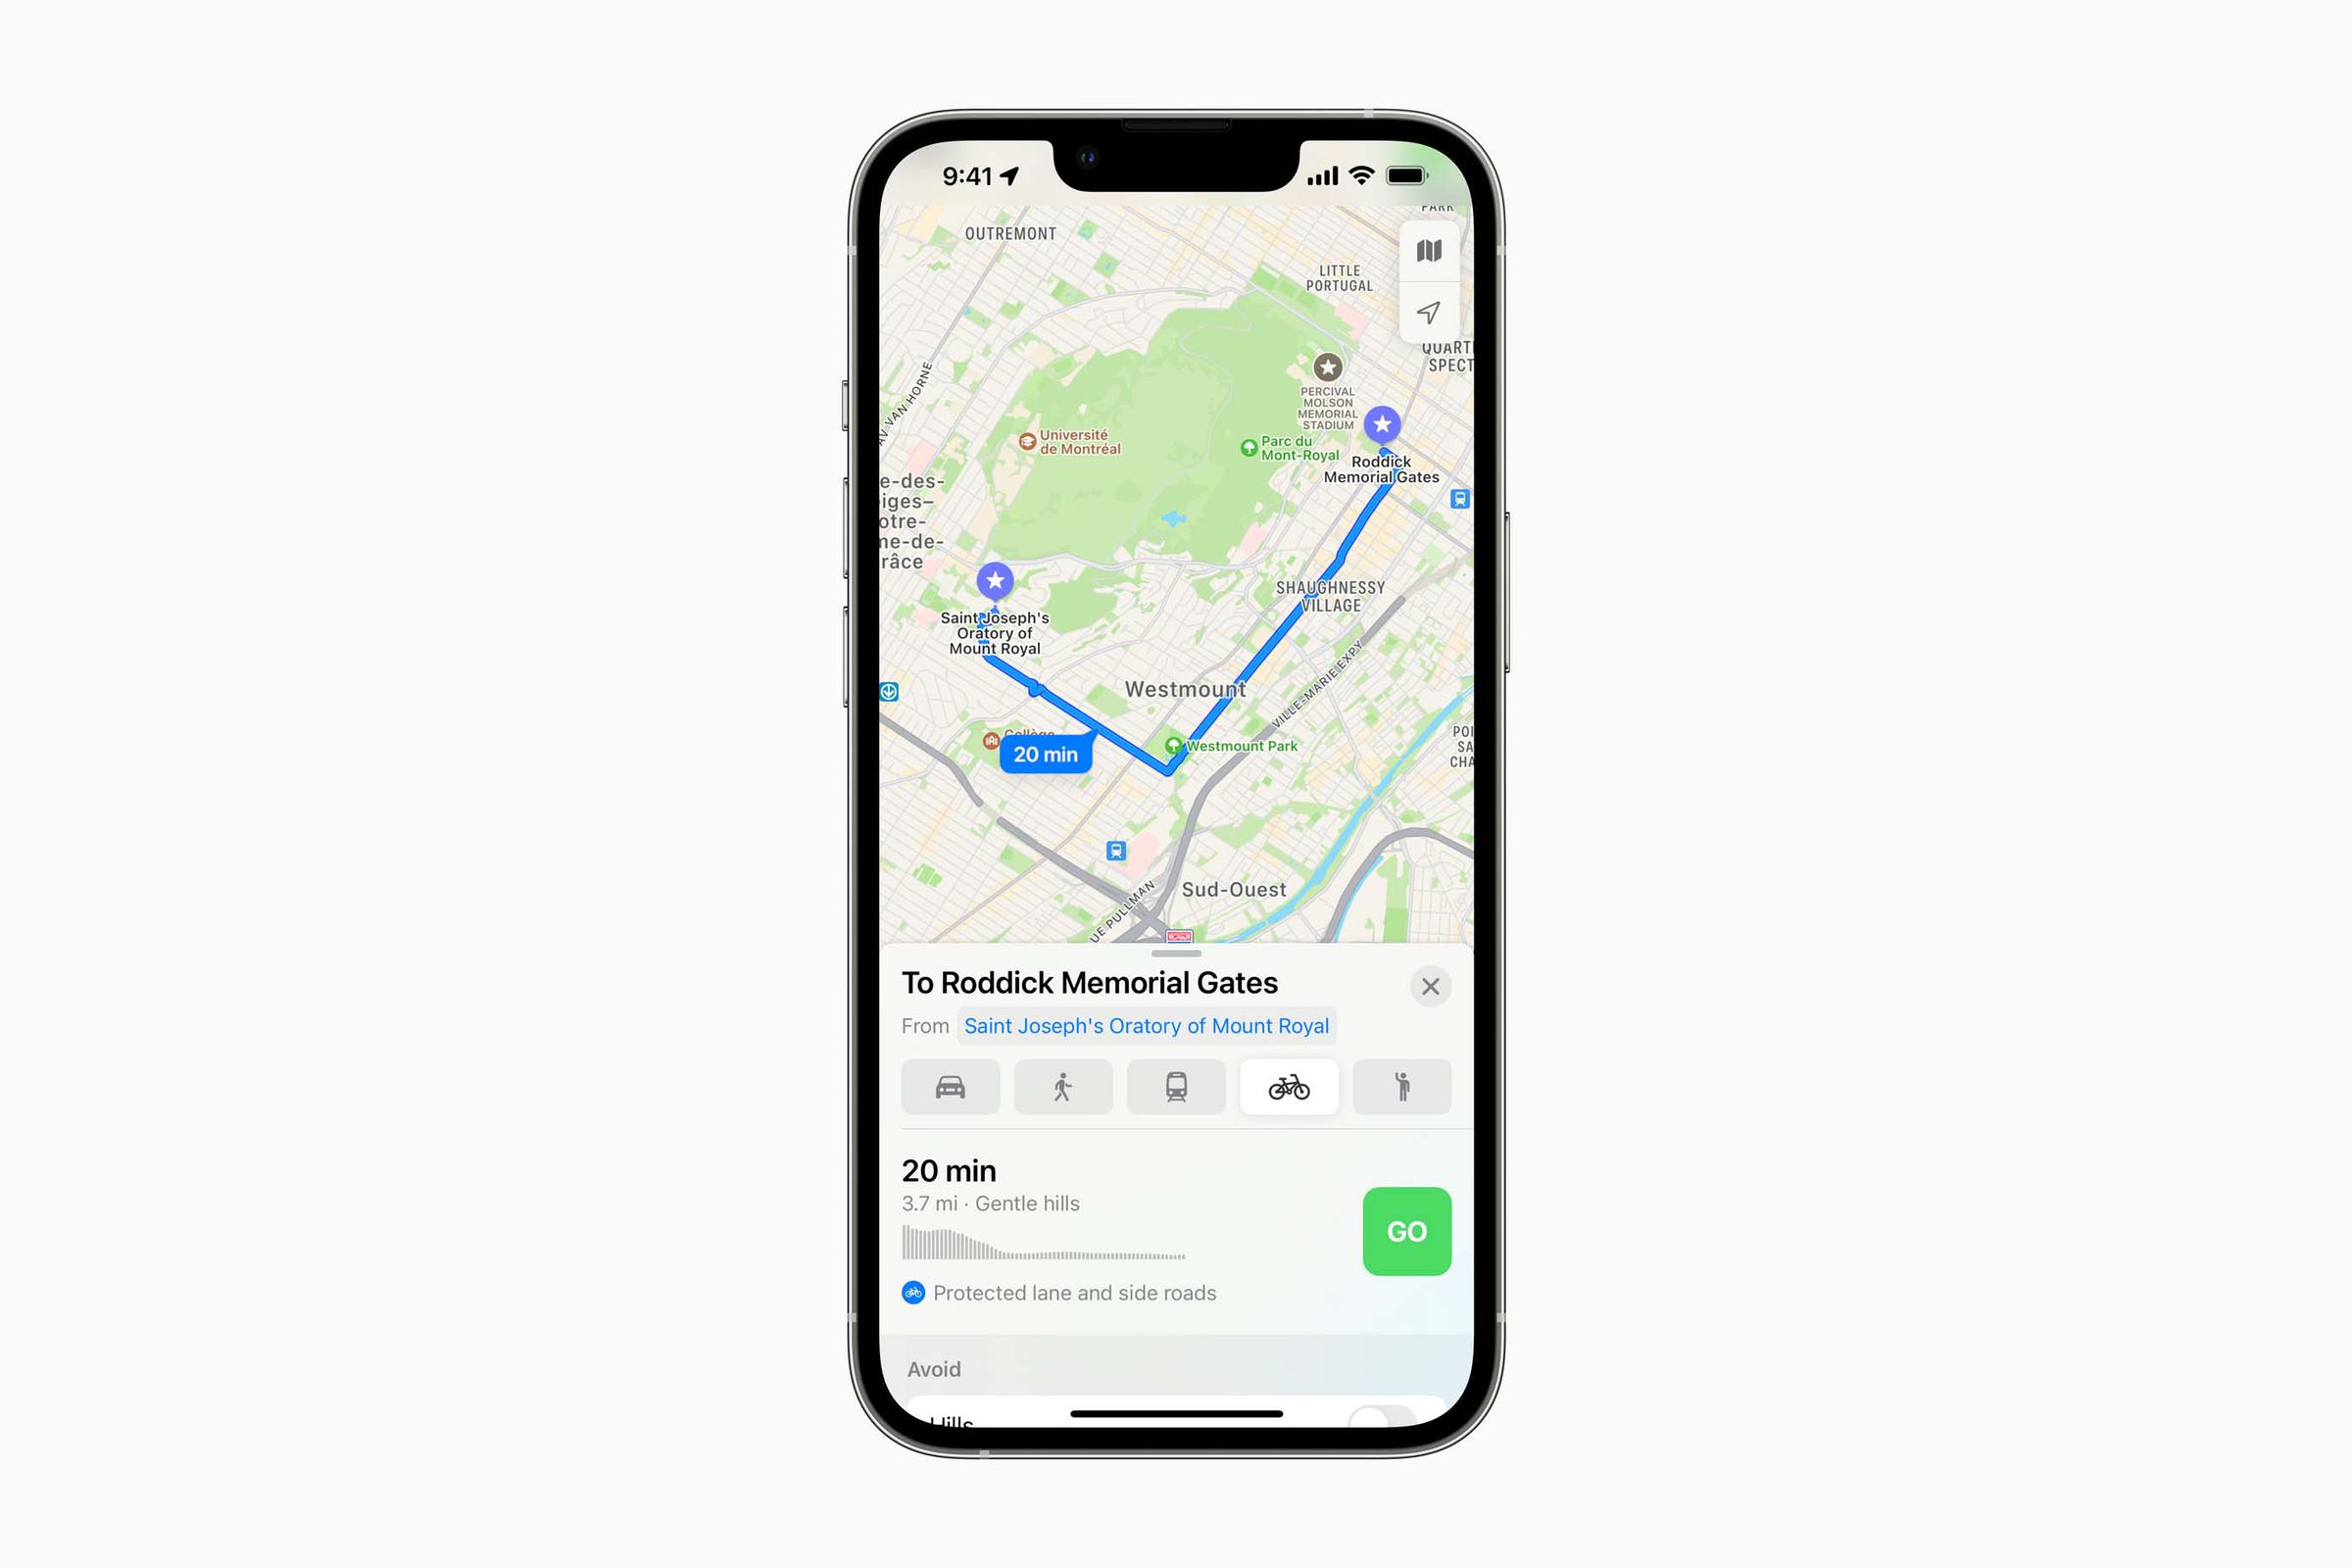 Apple Maps’ cycling directions are also coming to Montreal.